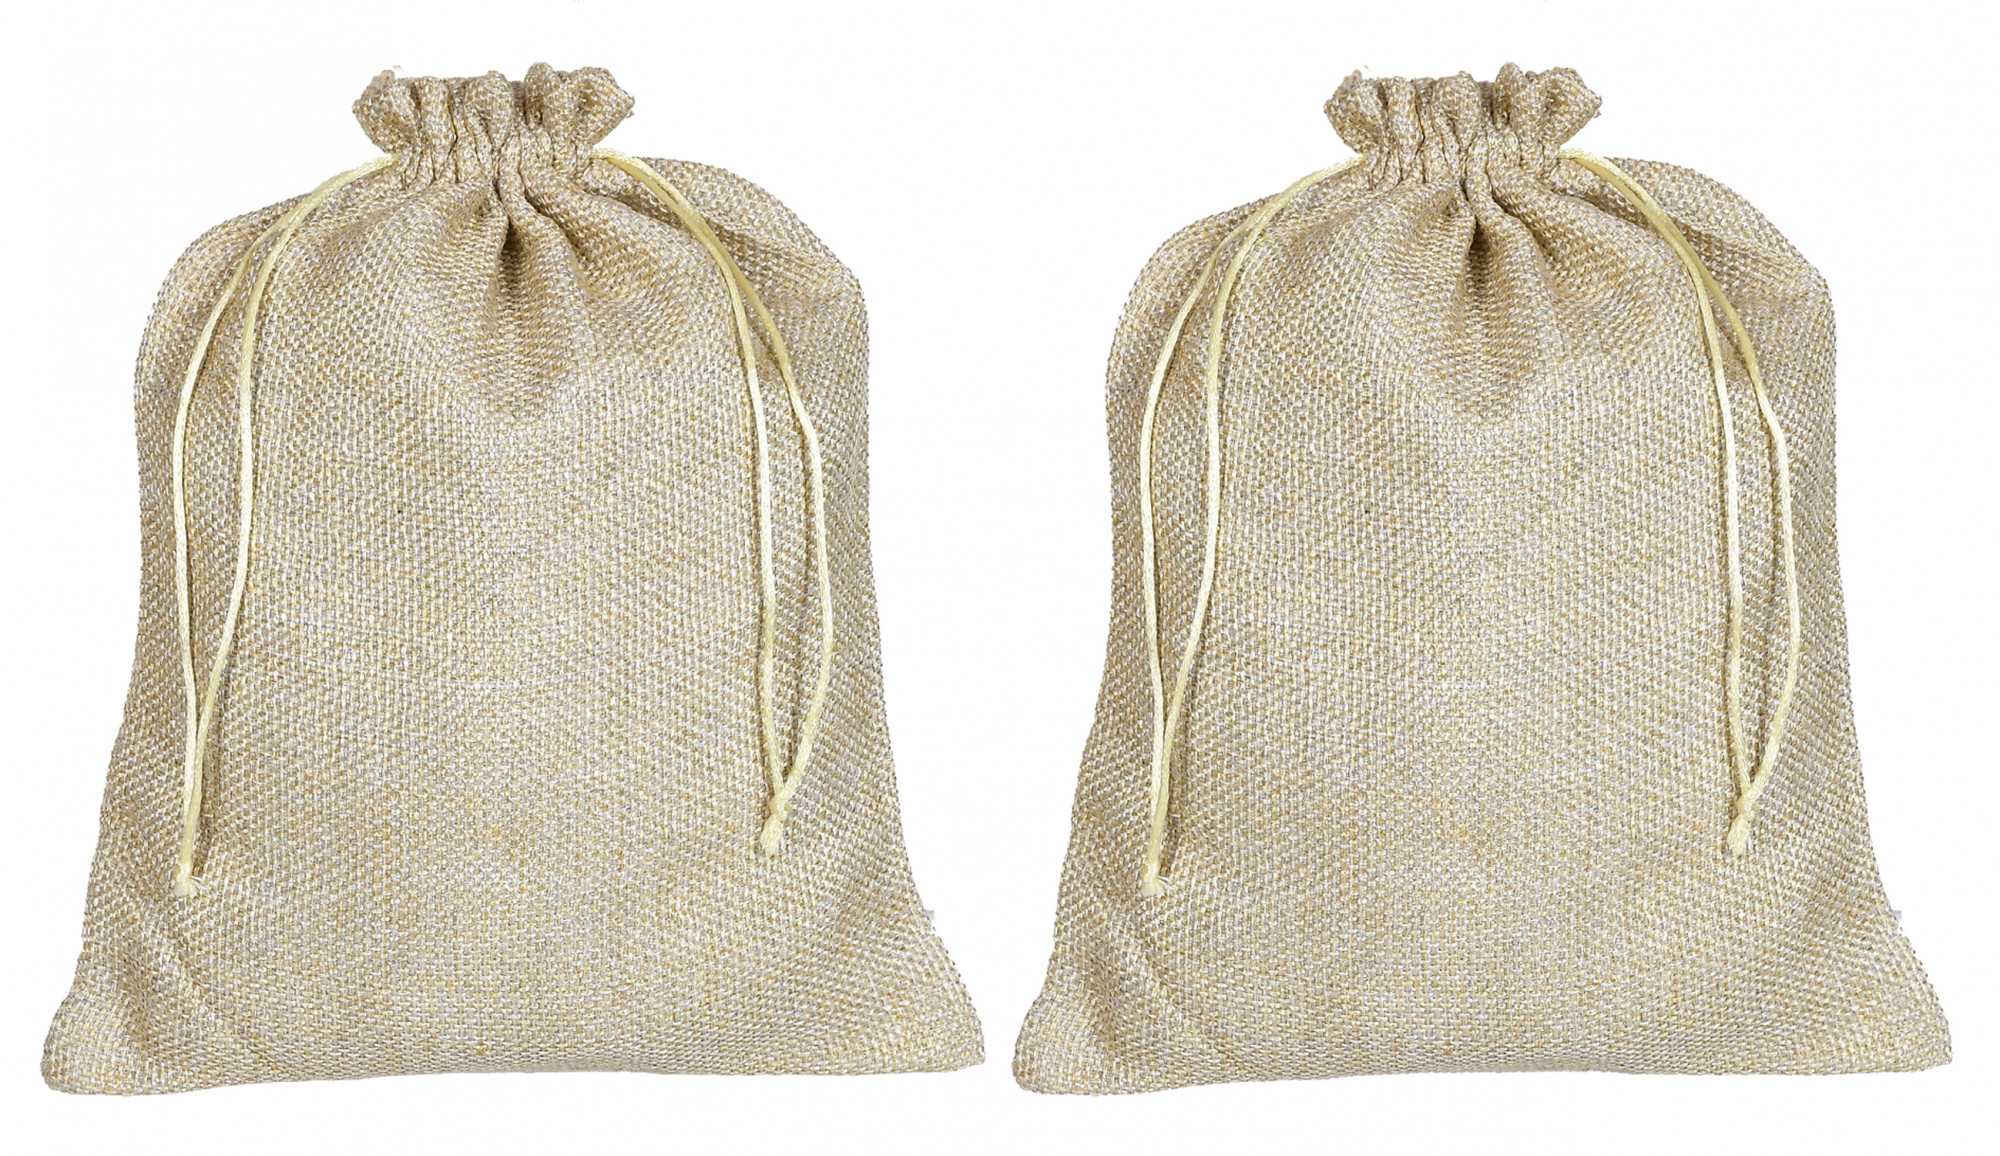 Kuber Industries Jute Small Size Gift Bags With Drawstring For Gifts Jewelry And Storage-(Gold)